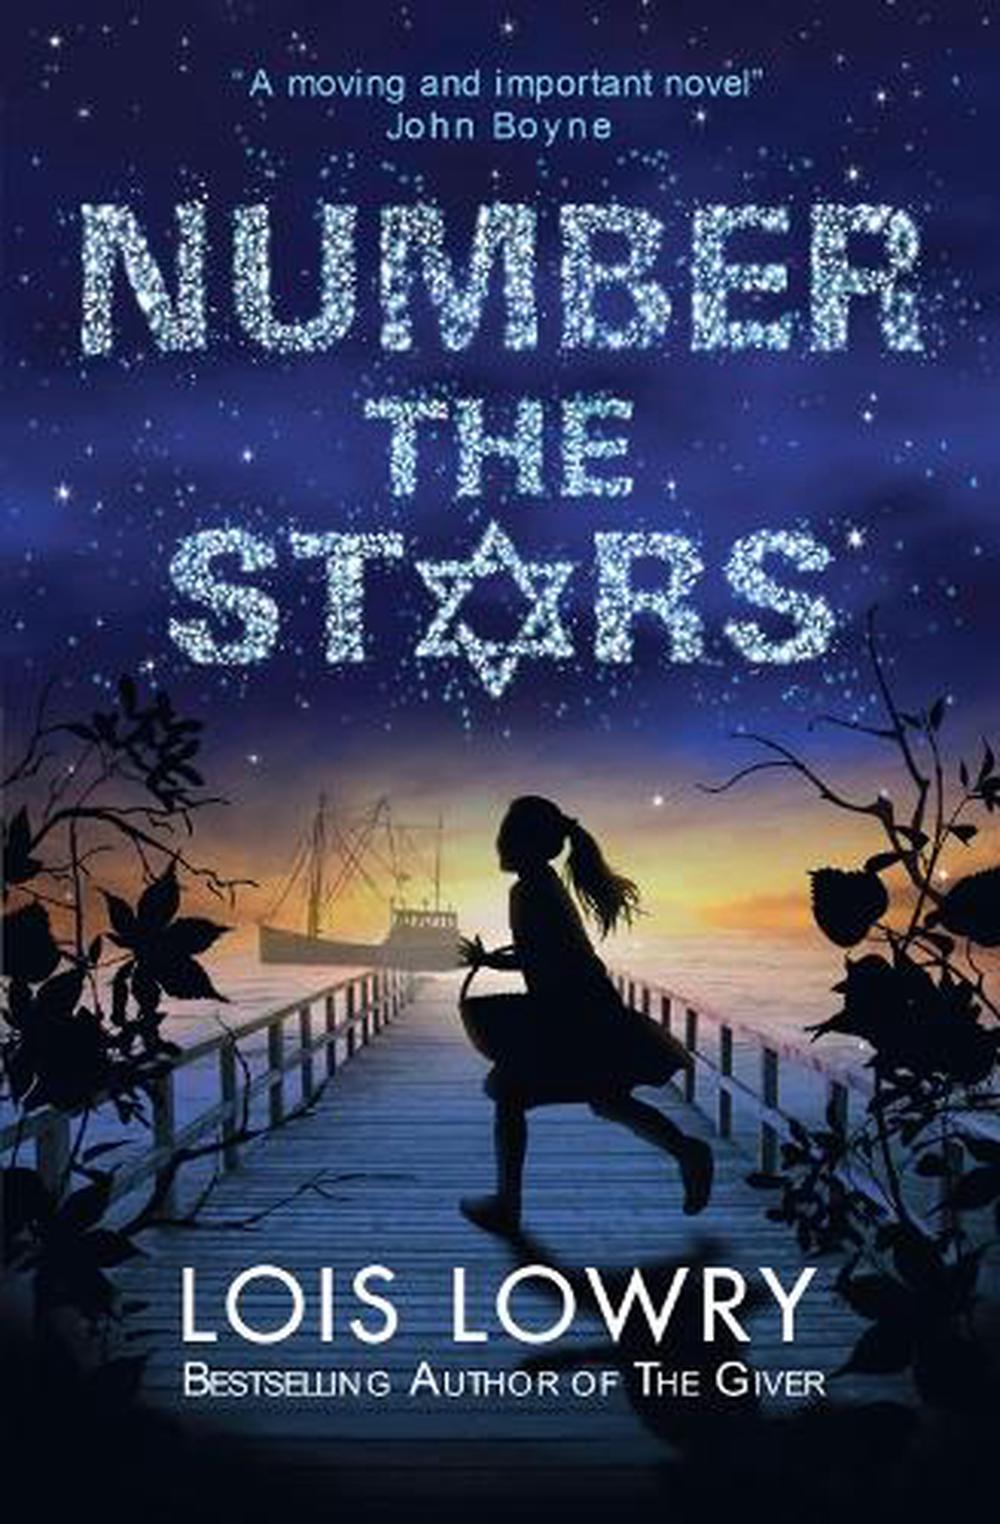 number-the-stars-by-lois-lowry-paperback-9780007395200-buy-online-at-the-nile